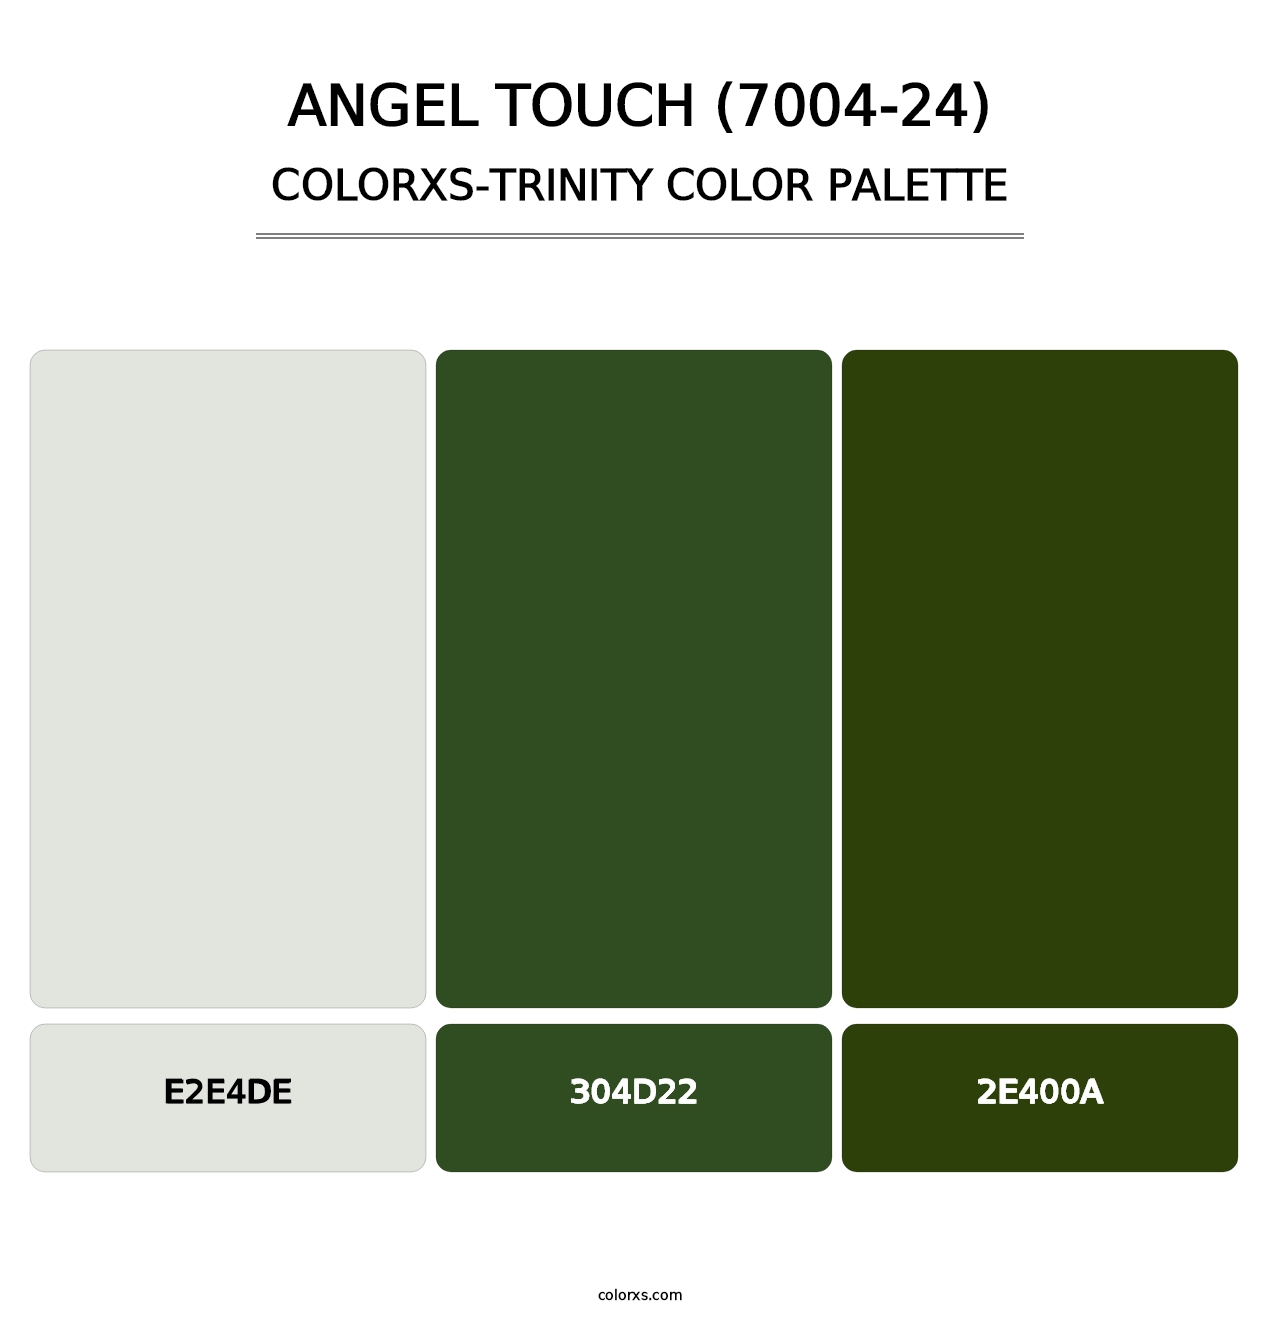 Angel Touch (7004-24) - Colorxs Trinity Palette